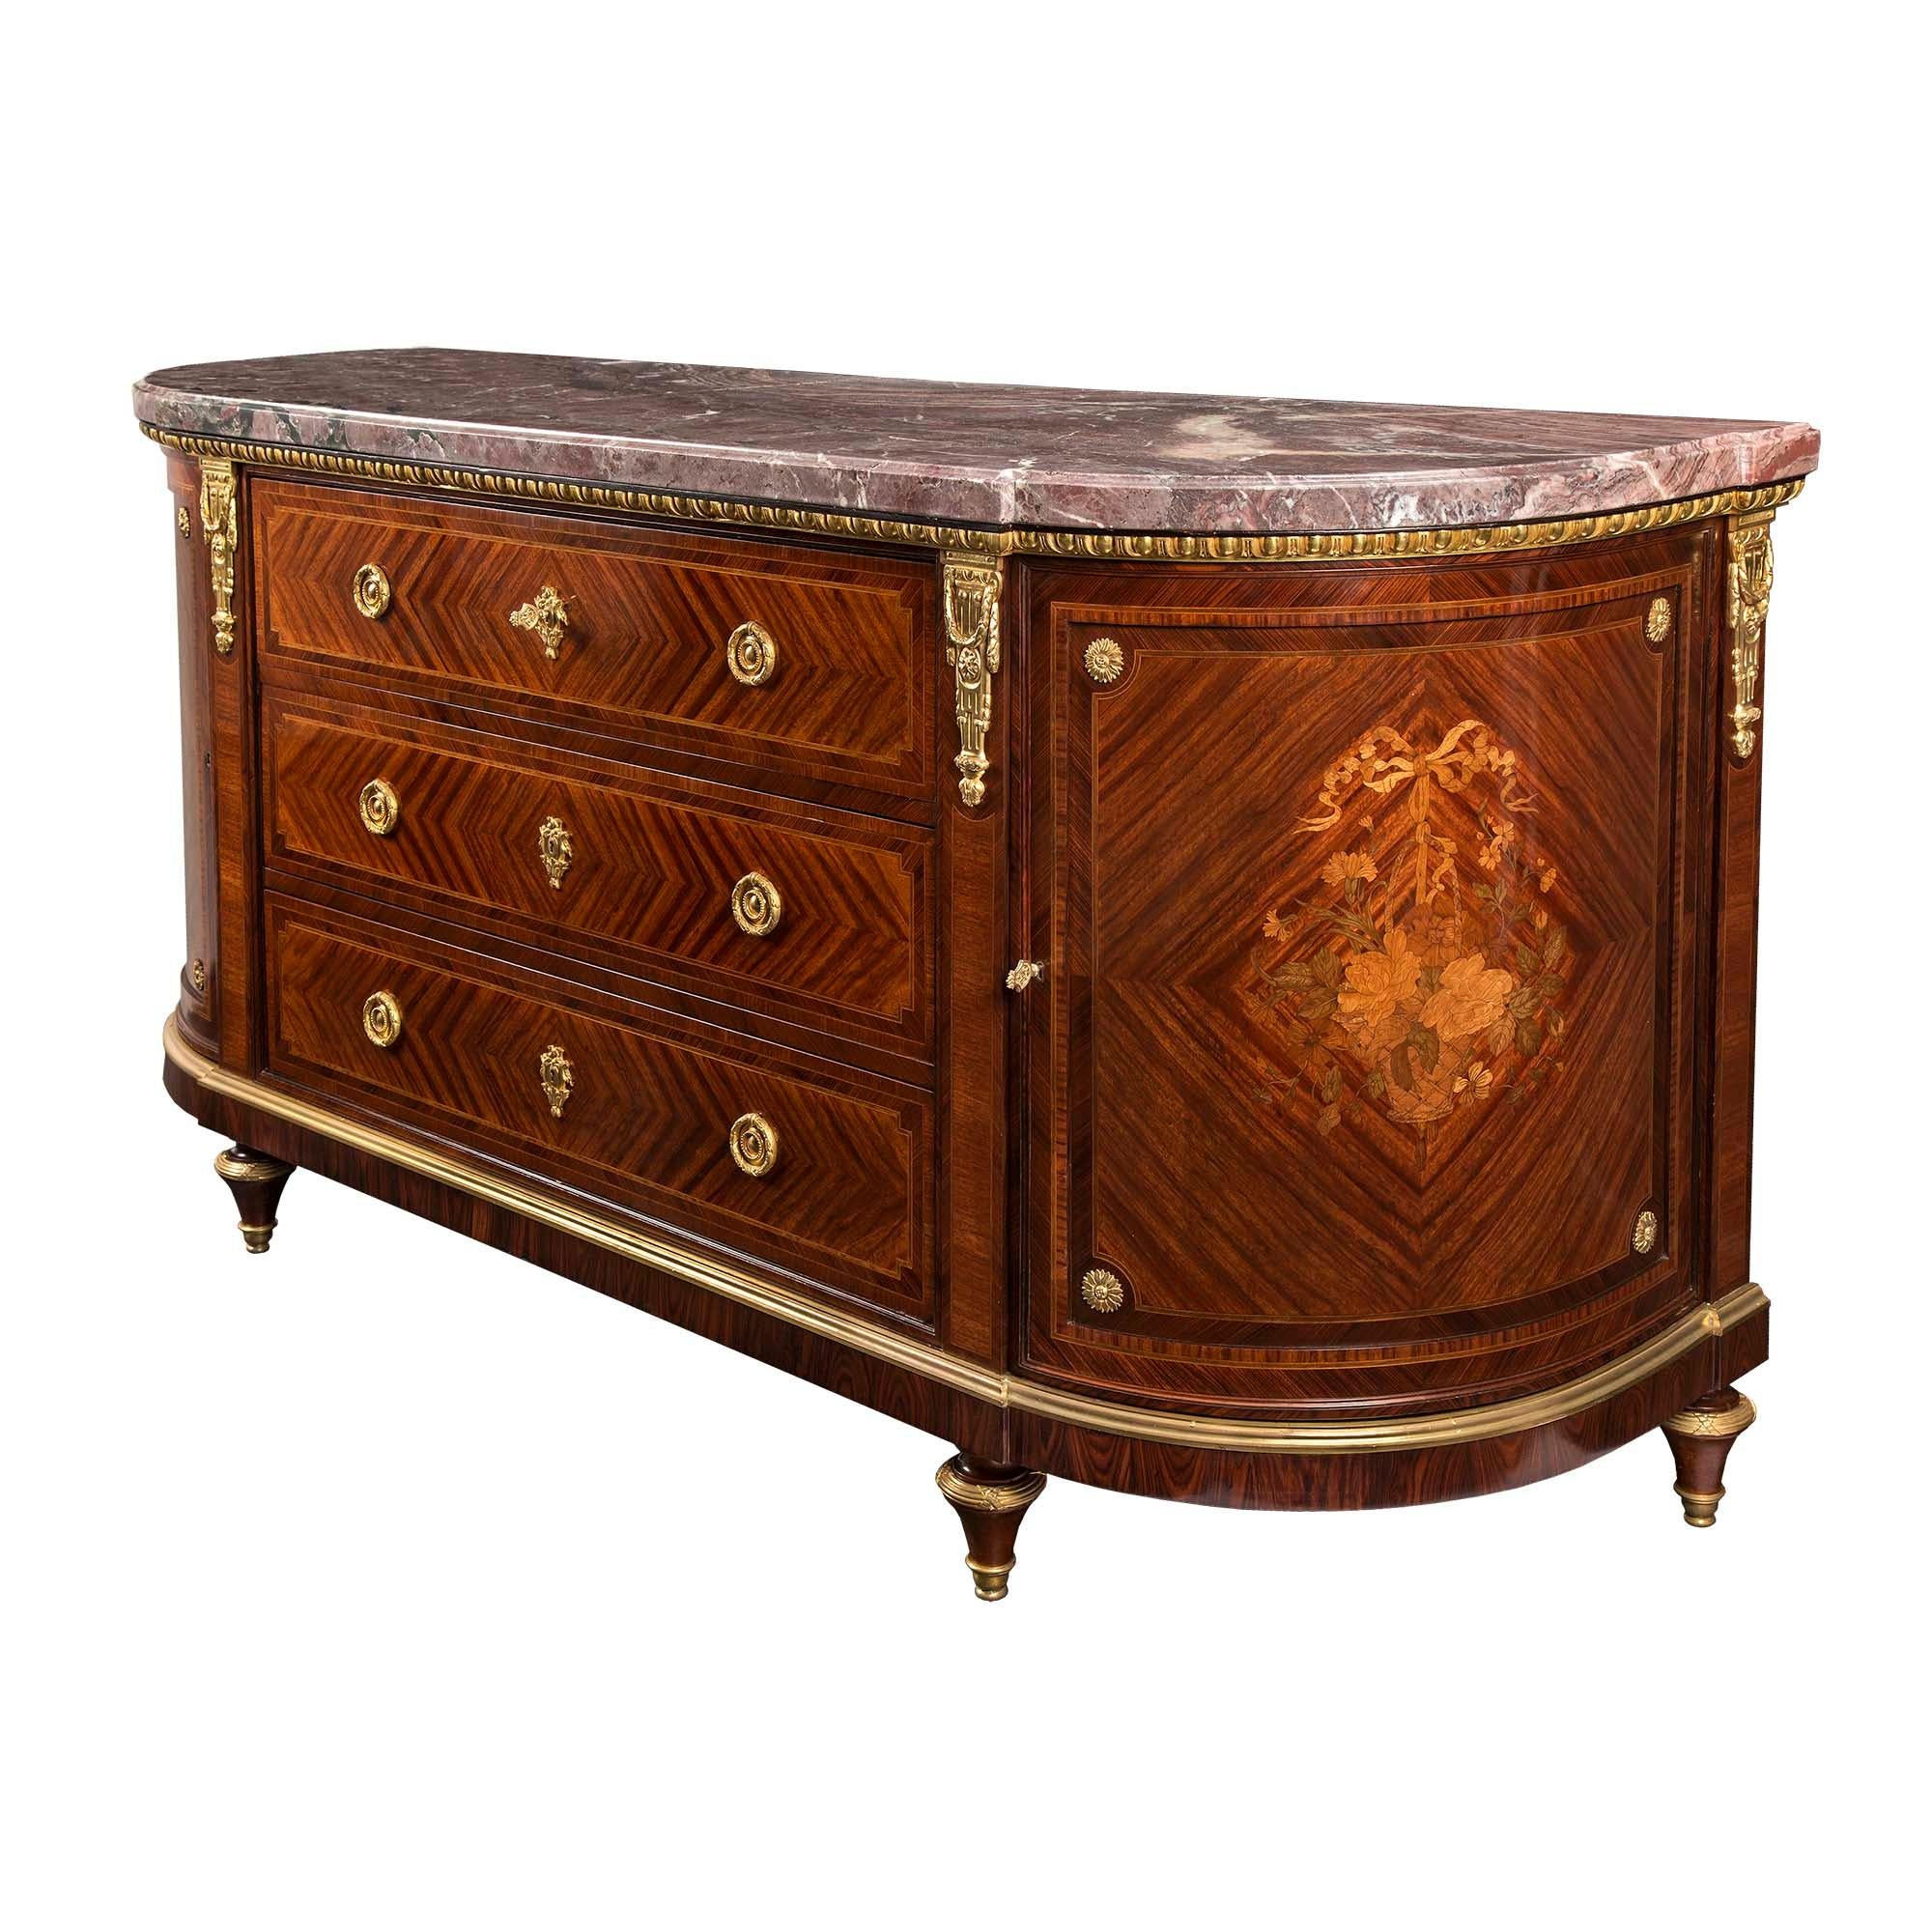 French 19th Century Louis XVI Style Kingwood, Tulipwood and Ormolu Buffet For Sale 1